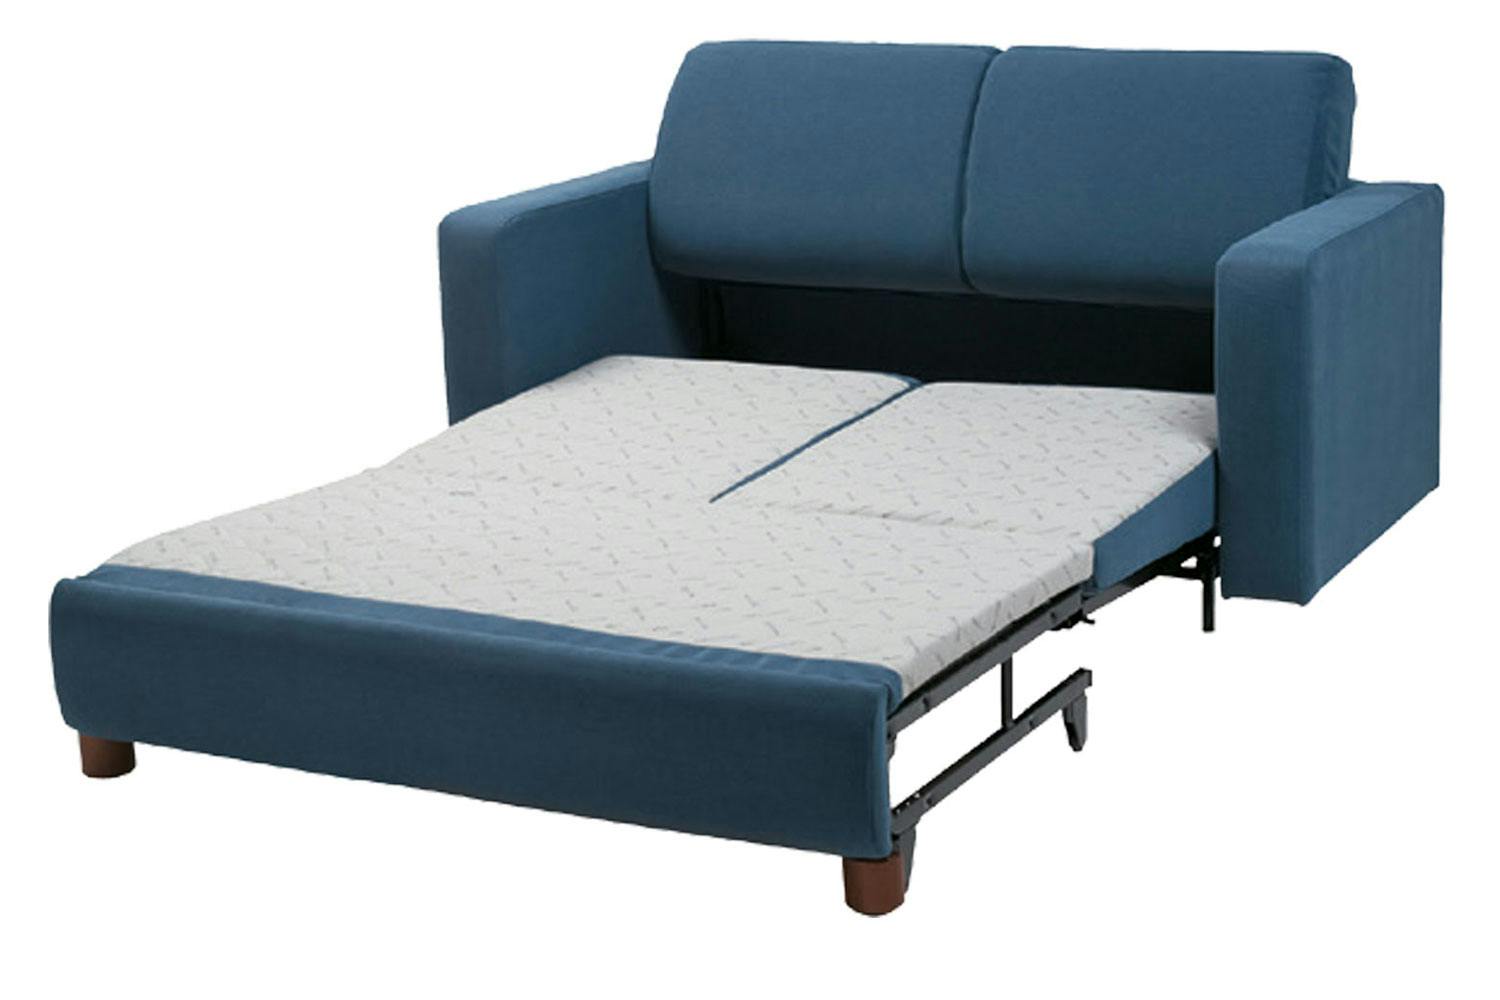 nz bed and sofa